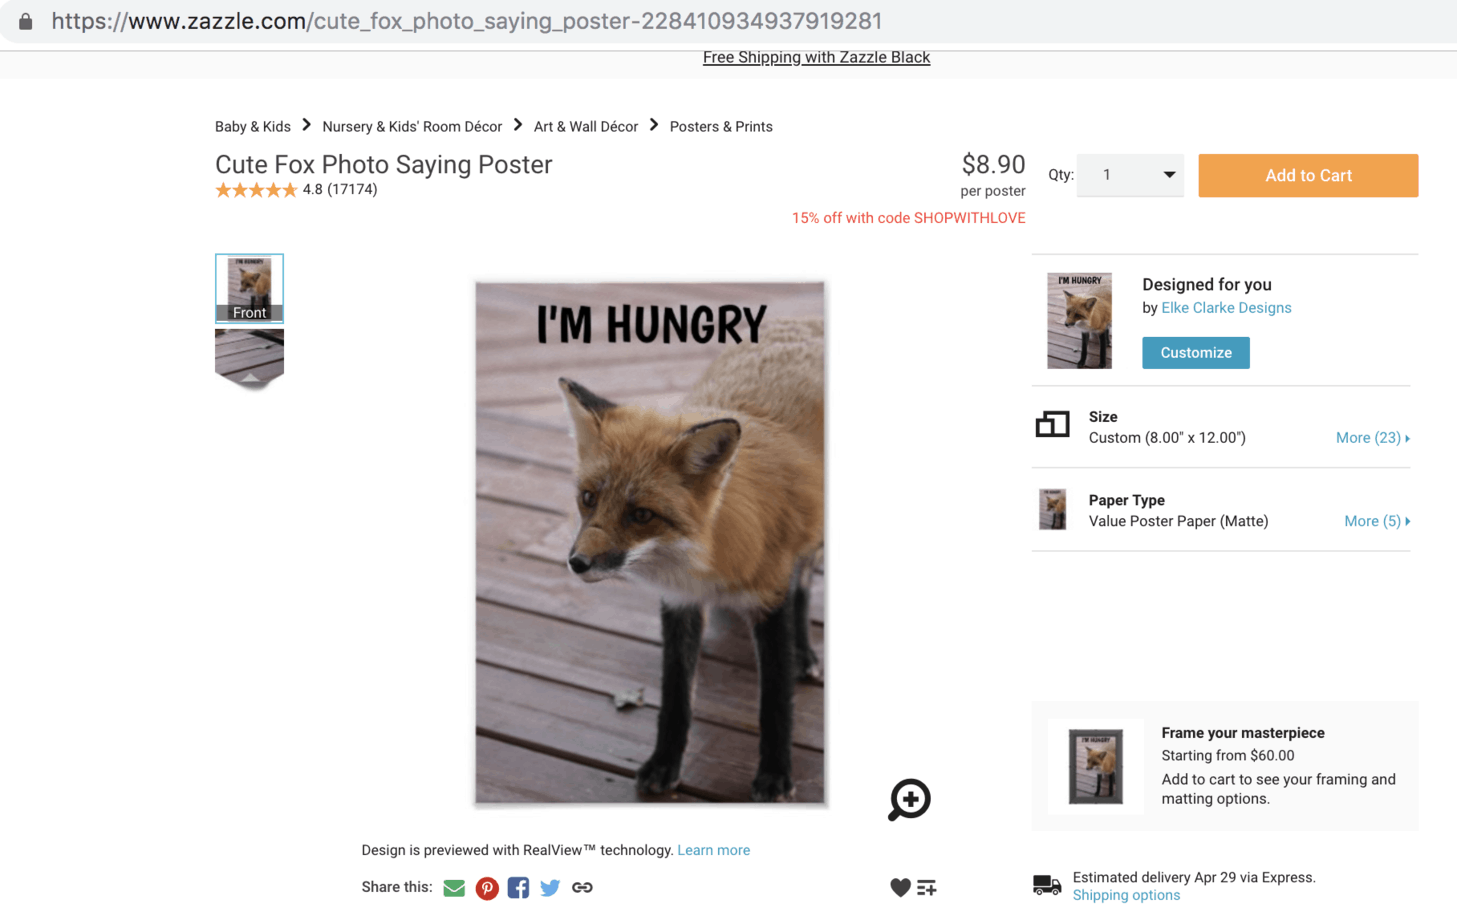 The fox poster is now for sale on Zazzle